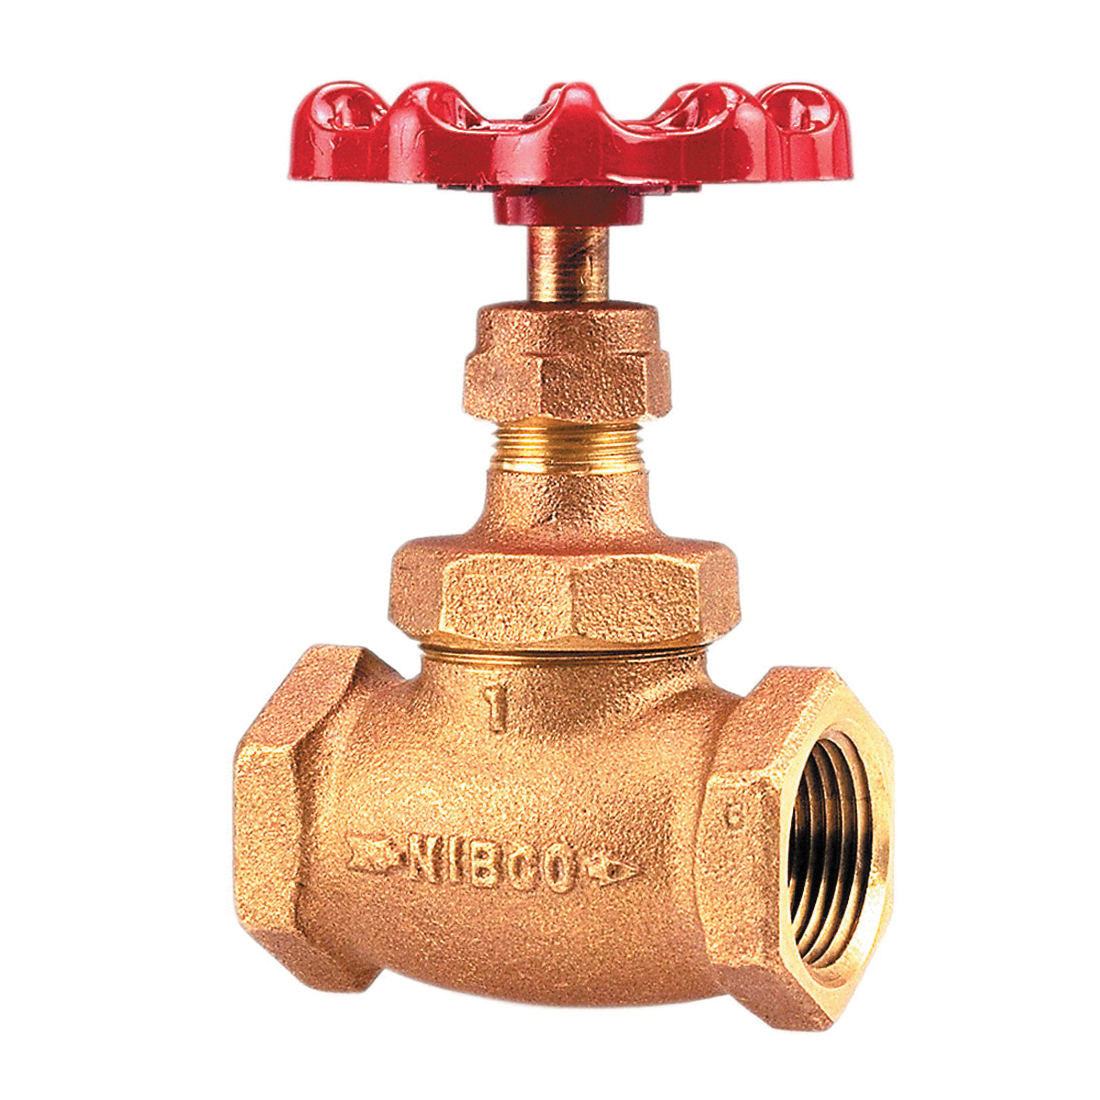 NIBCO® N53XA1A KT-65-UL Globe Valve, 1 in Nominal, FNPT End Style, 125 lb, Bronze Body, Hand Wheel Actuator, Domestic